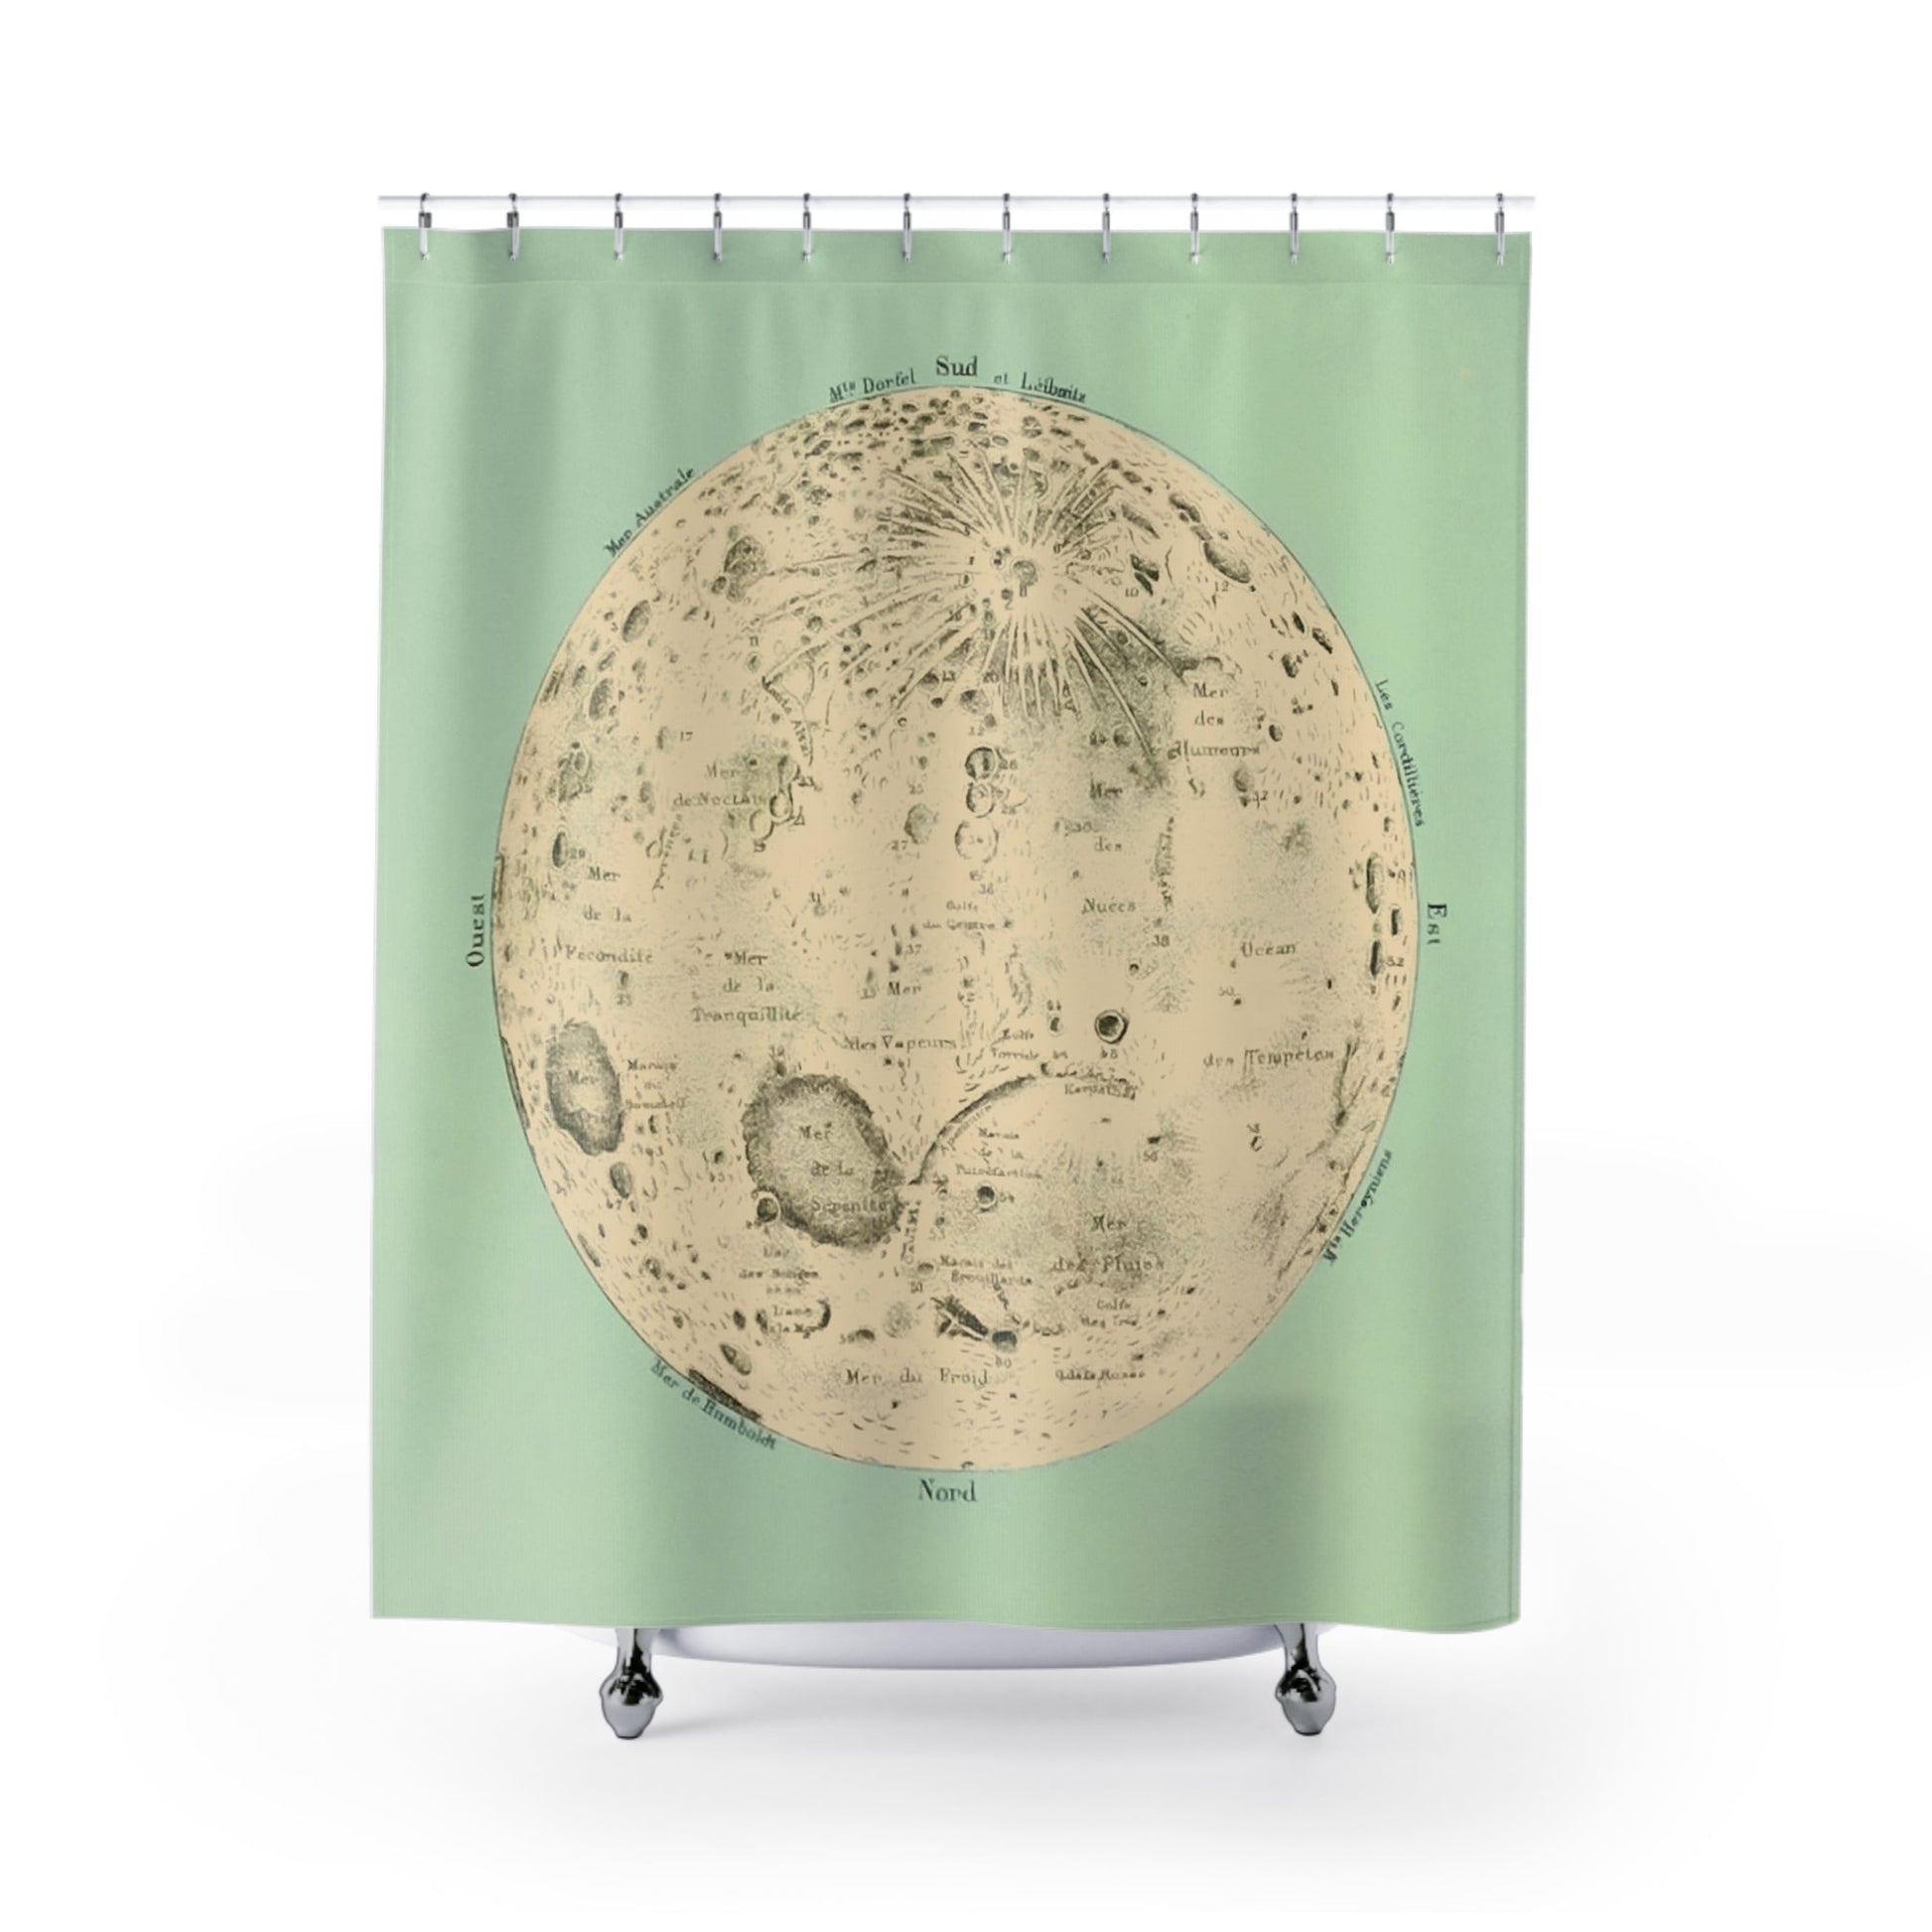 Teal Moon Shower Curtain with vintage drawing design, artistic bathroom decor showcasing detailed moon art.